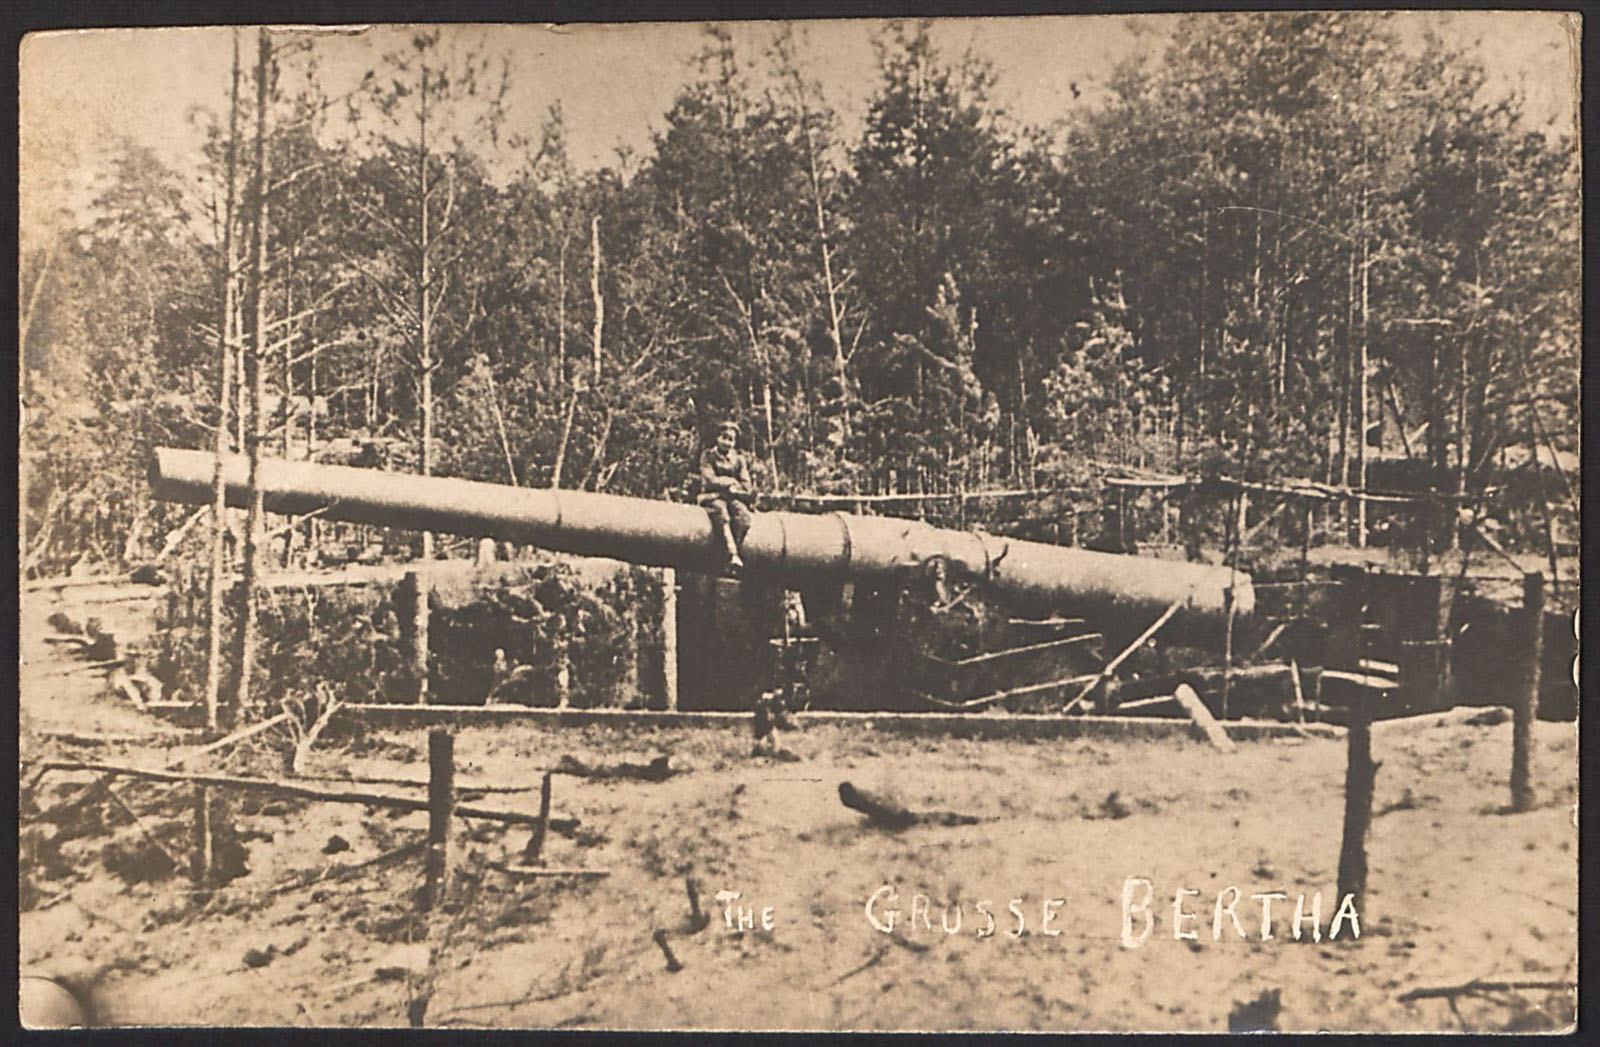 Vintage sepia photograph of a massive artillery piece resting in the woods.